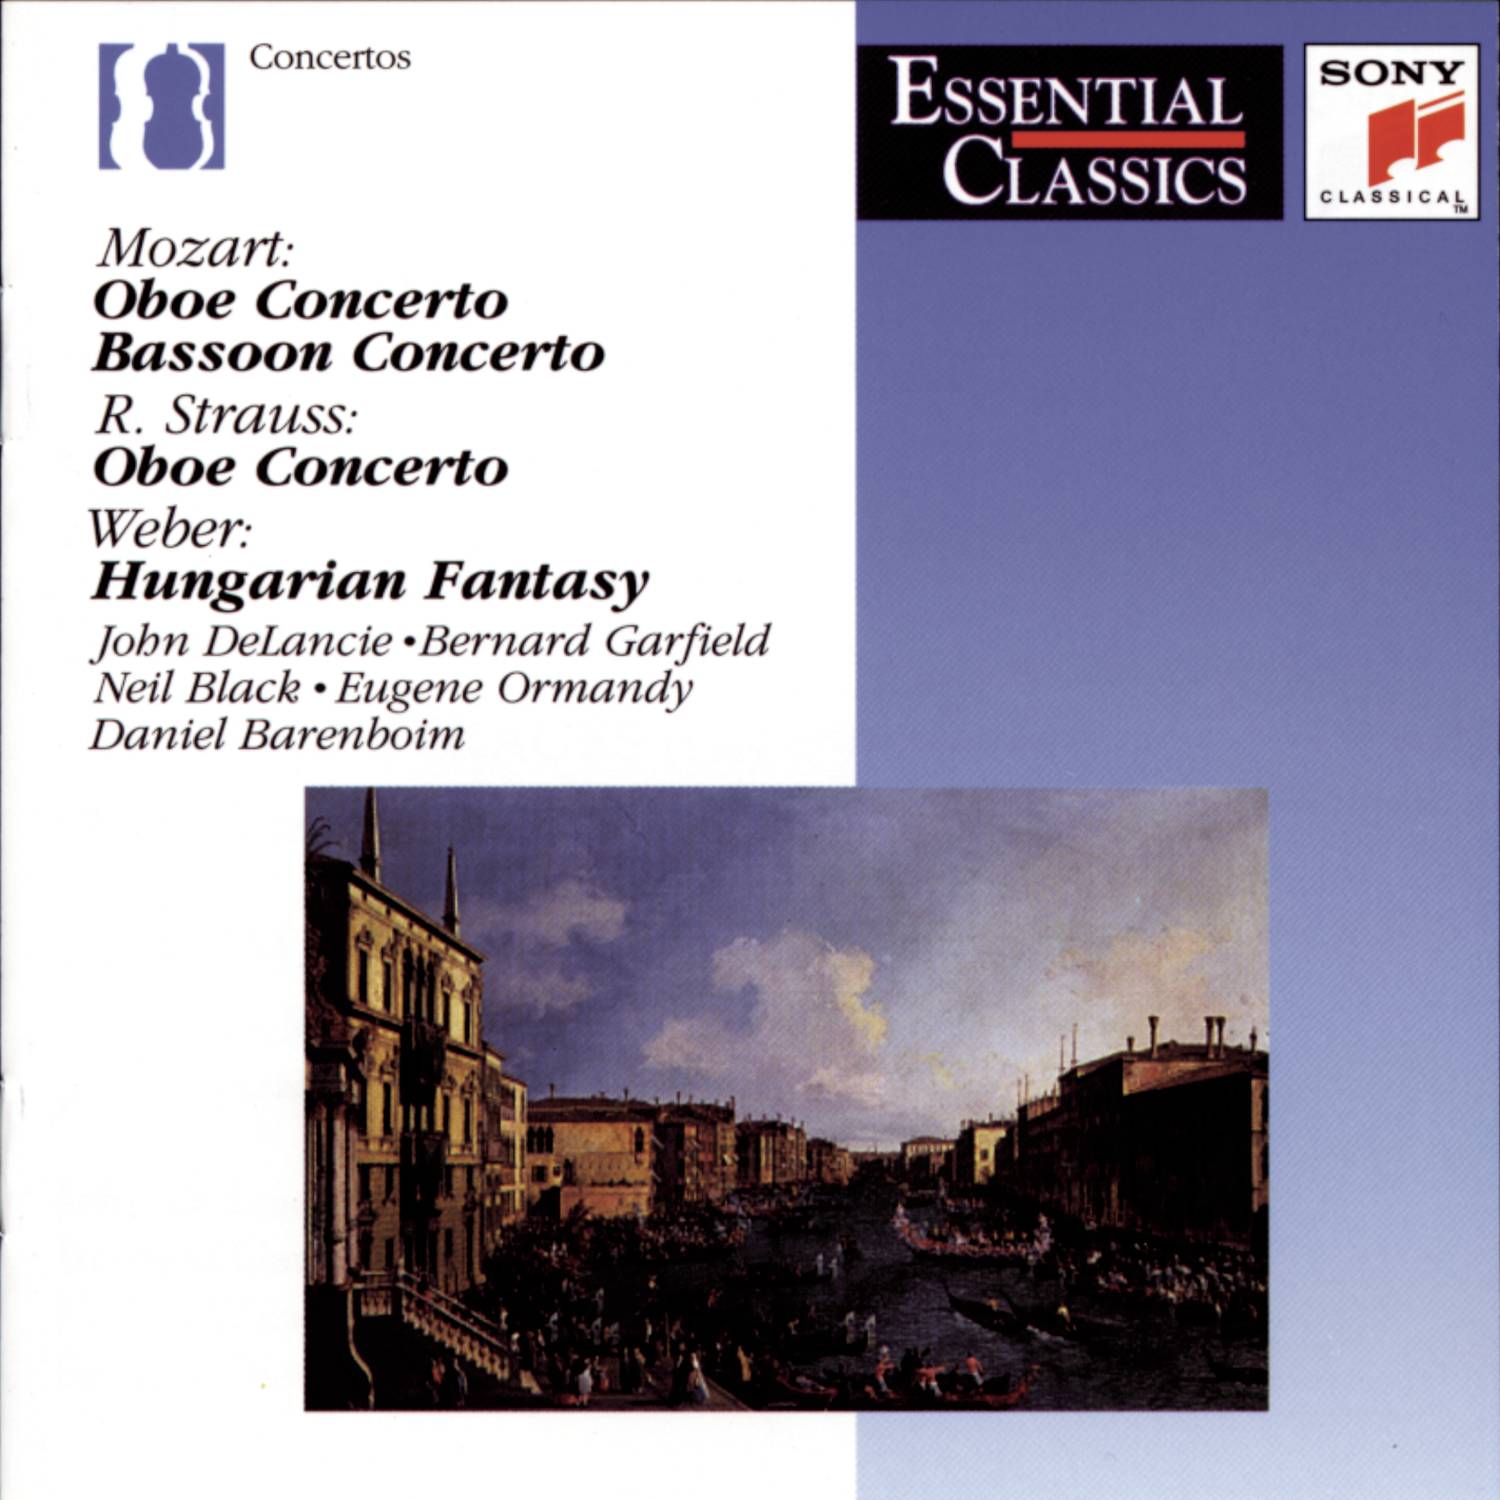 Concerto for Bassoon and Orchestra in B-flat Major, K.191 (186e): I. Allegro